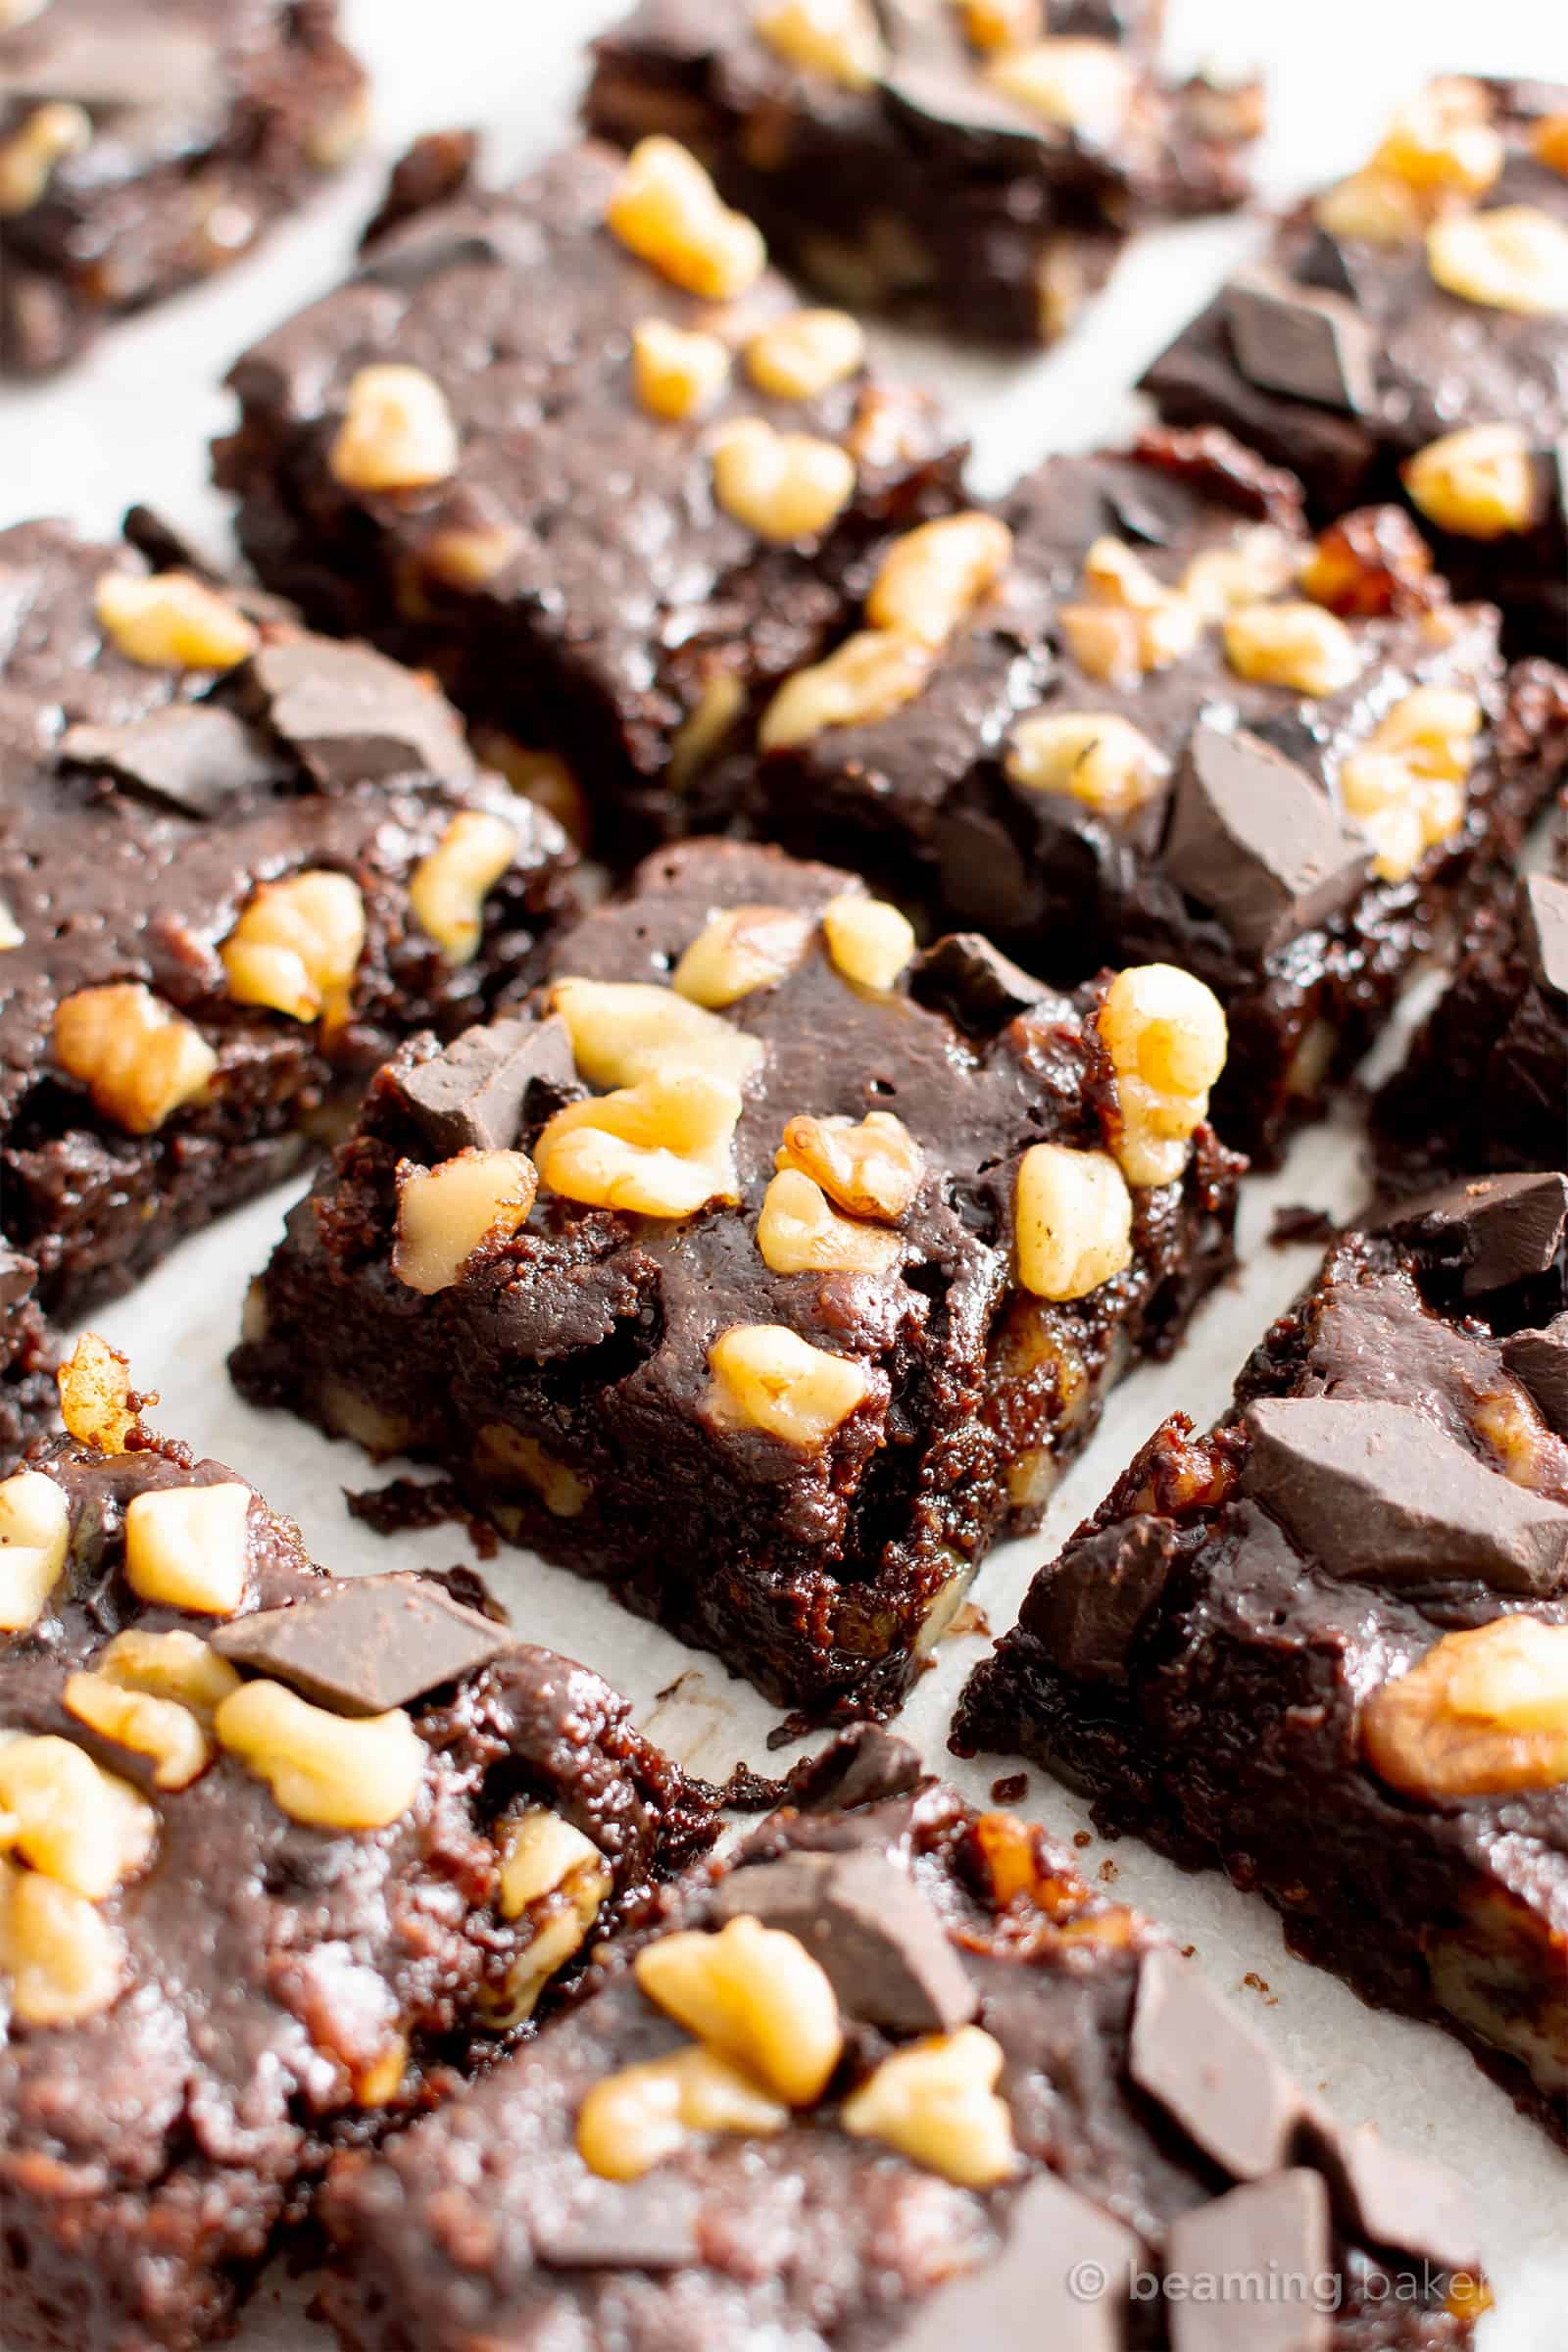 Vegan Gluten Free Fudgy Walnut Brownies Recipe (V, GF): a 1-bowl recipe for super fudgy, rich, dark brownies packed with walnuts and chocolate chunks. Made with healthy, whole ingredients. #Vegan #GlutenFree #GlutenFreeVegan #Brownies #VeganBrownies #DairyFree #BeamingBaker | Recipe at BeamingBaker.com